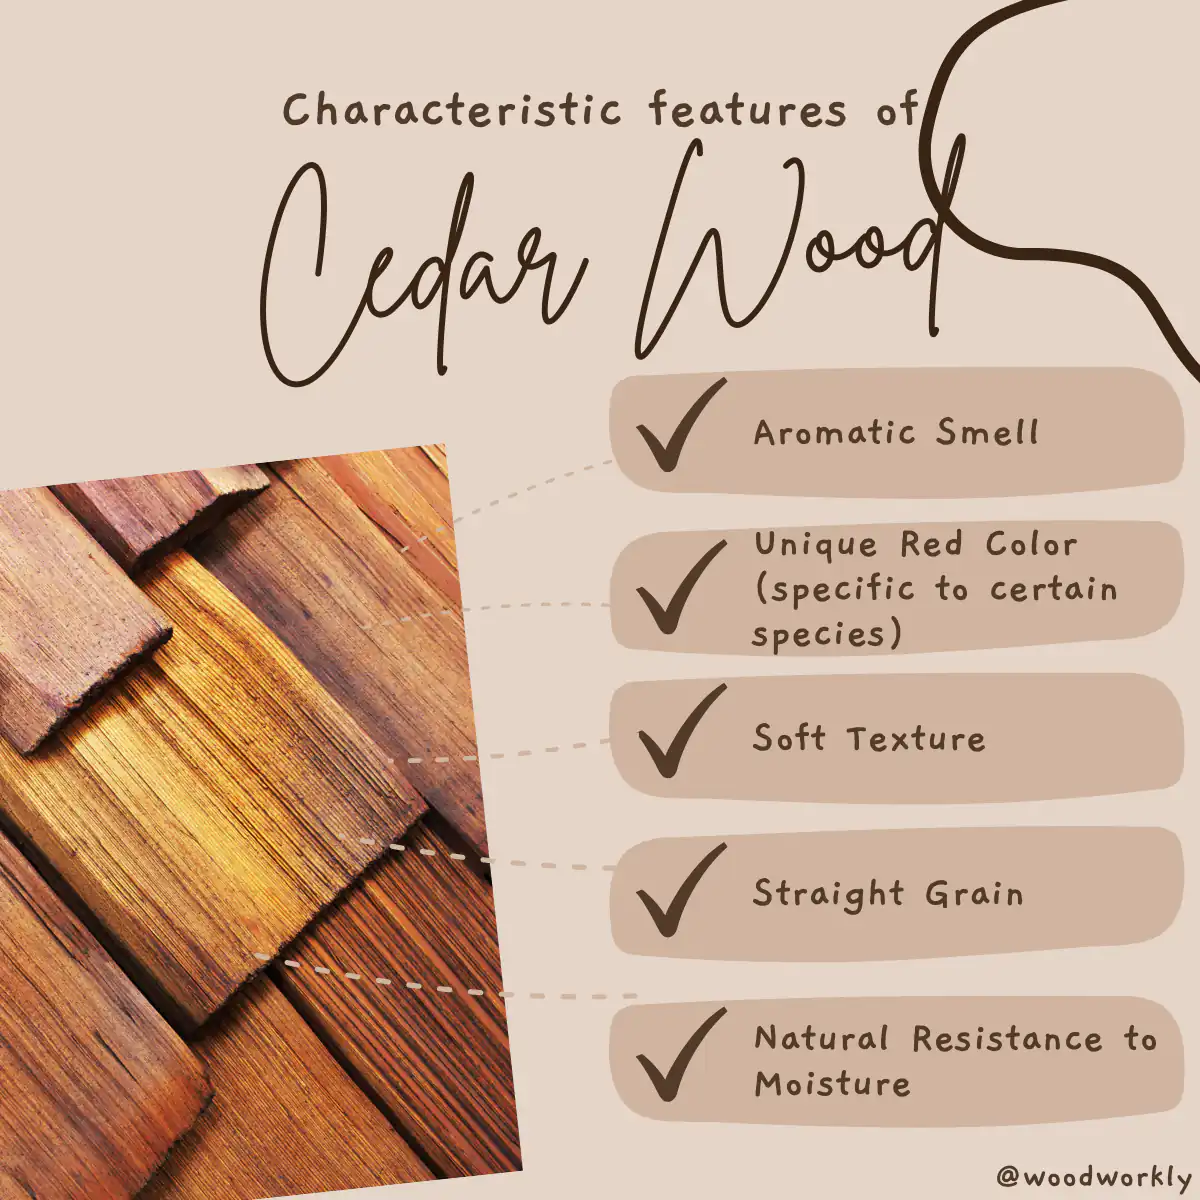 Characteristic features of Cedar wood